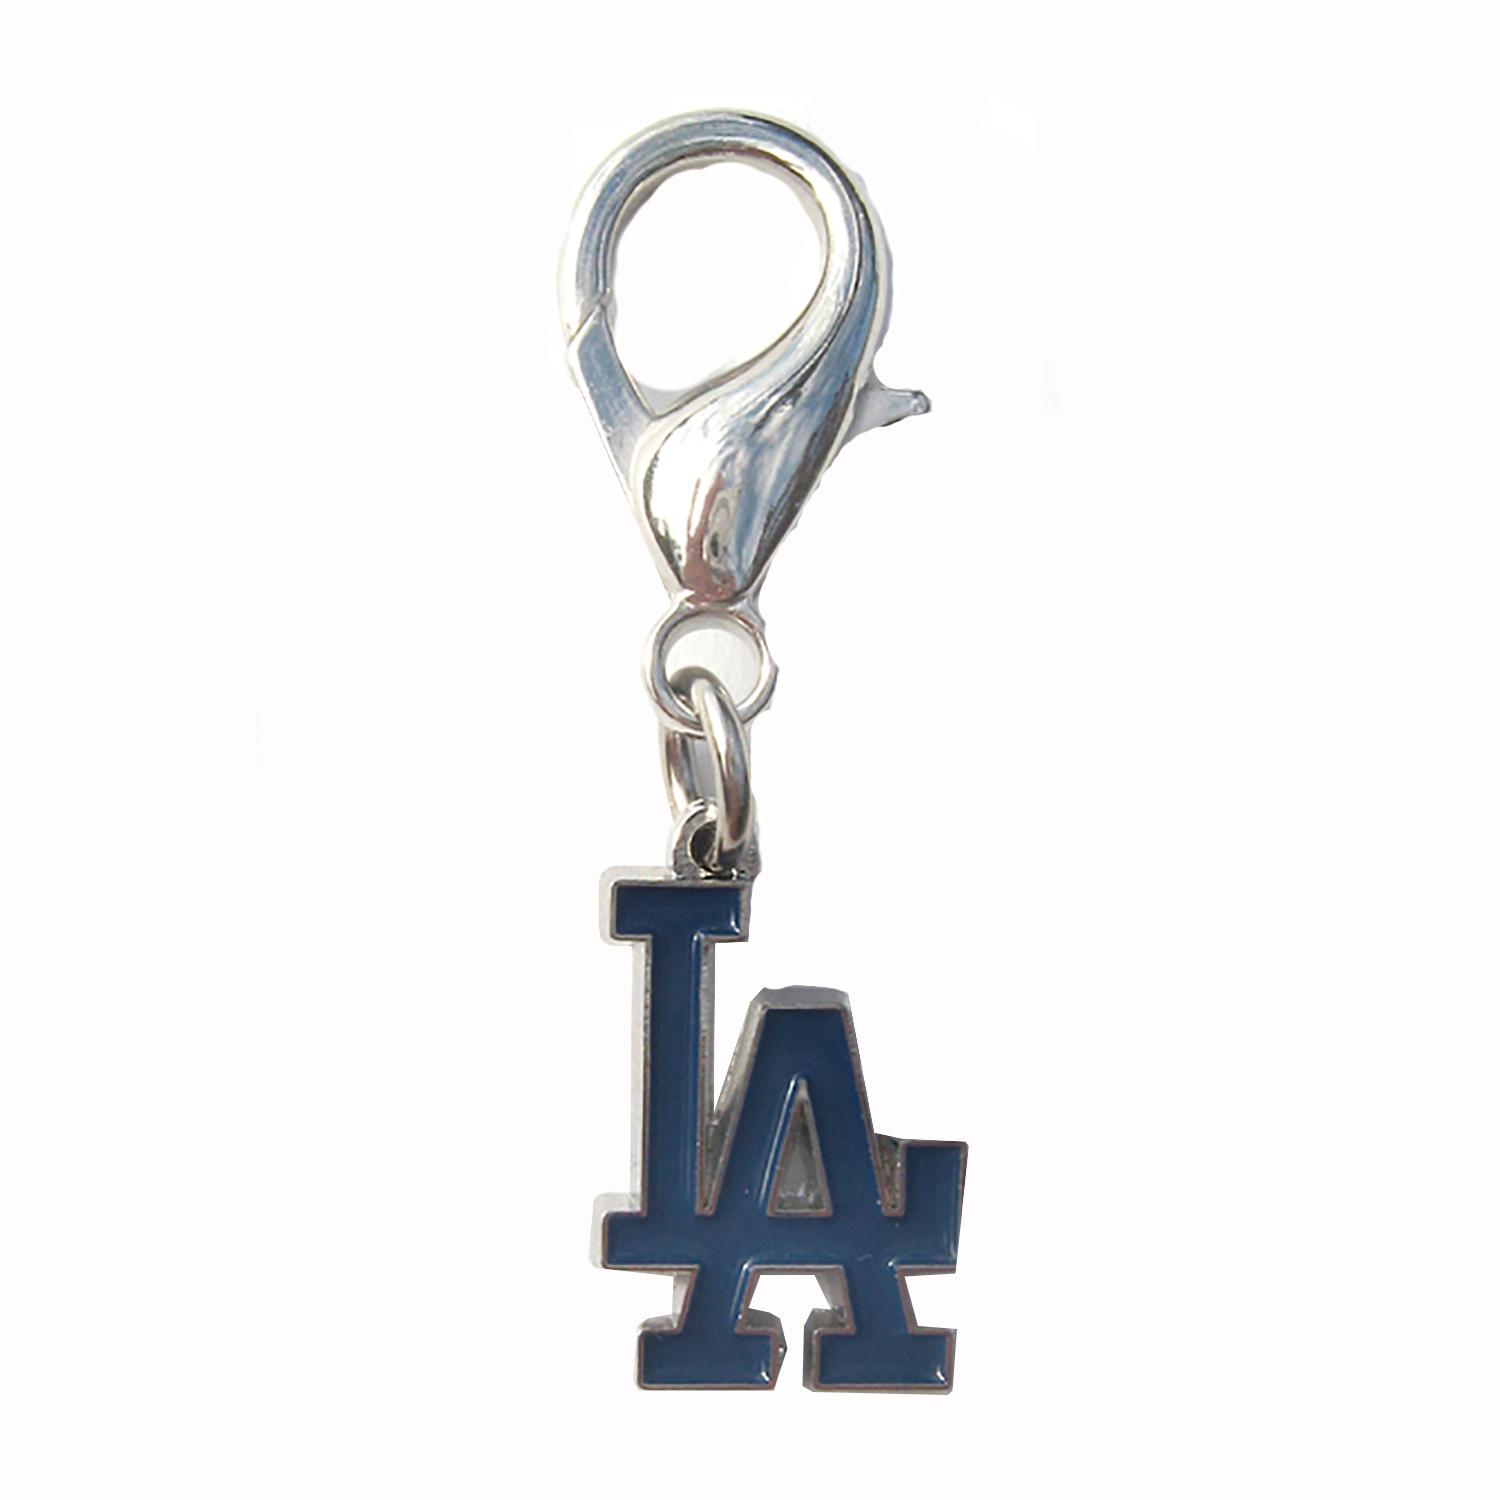 Official Los Angeles Dodgers Pet Gear, Dodgers Collars, Leashes, Chew Toys